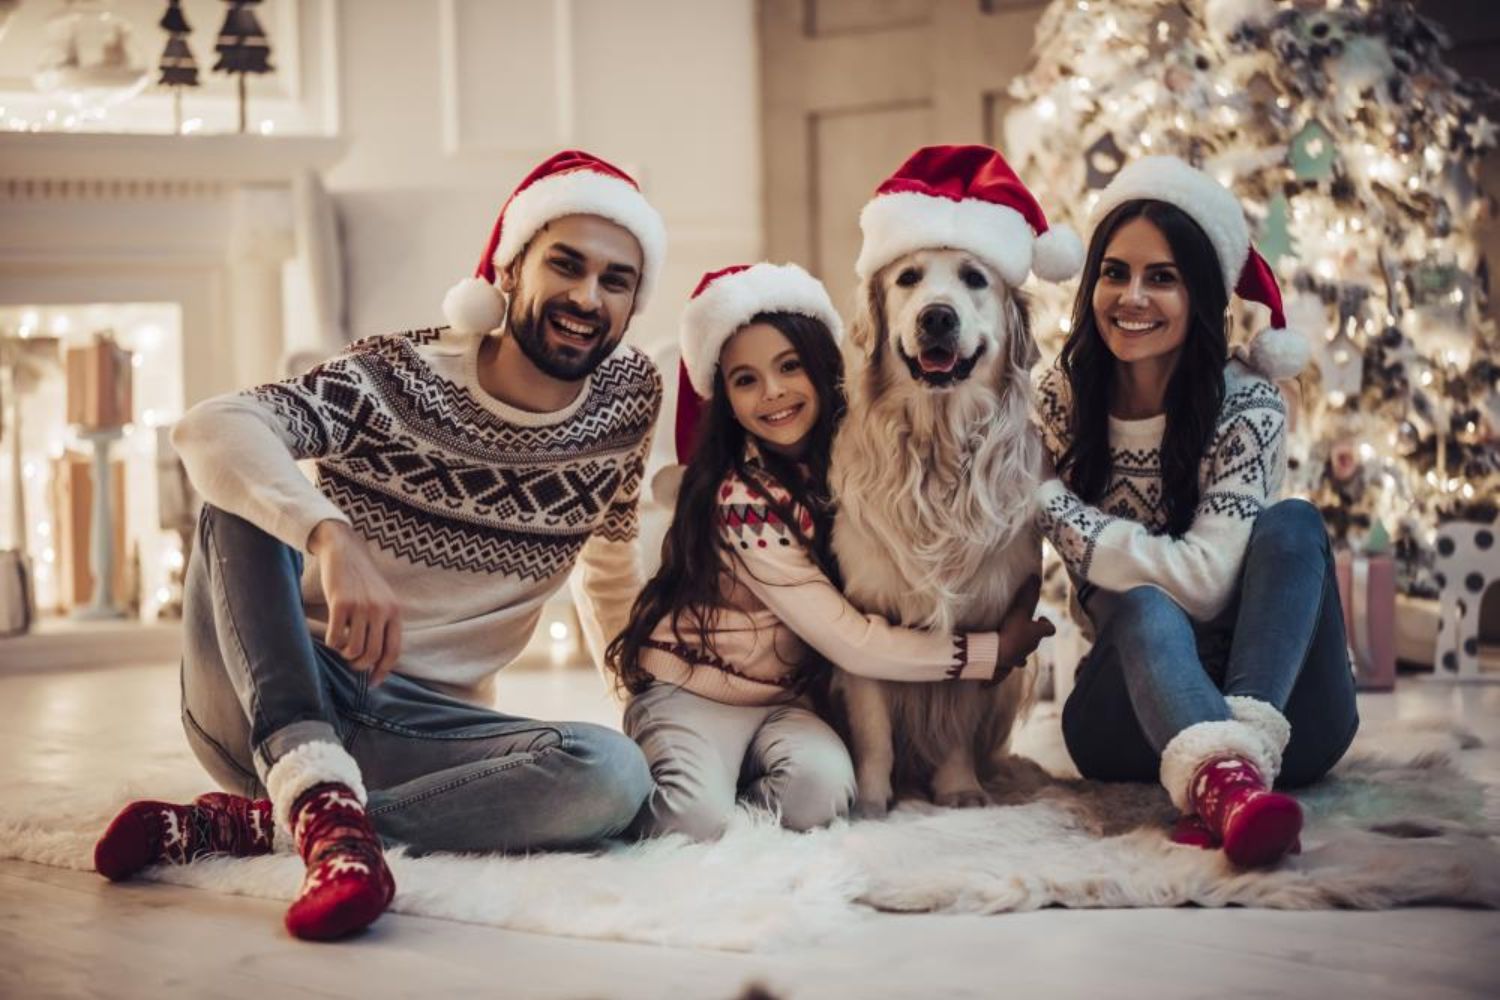 family snuggling with their dog photo by 4 PM production on shutterstock